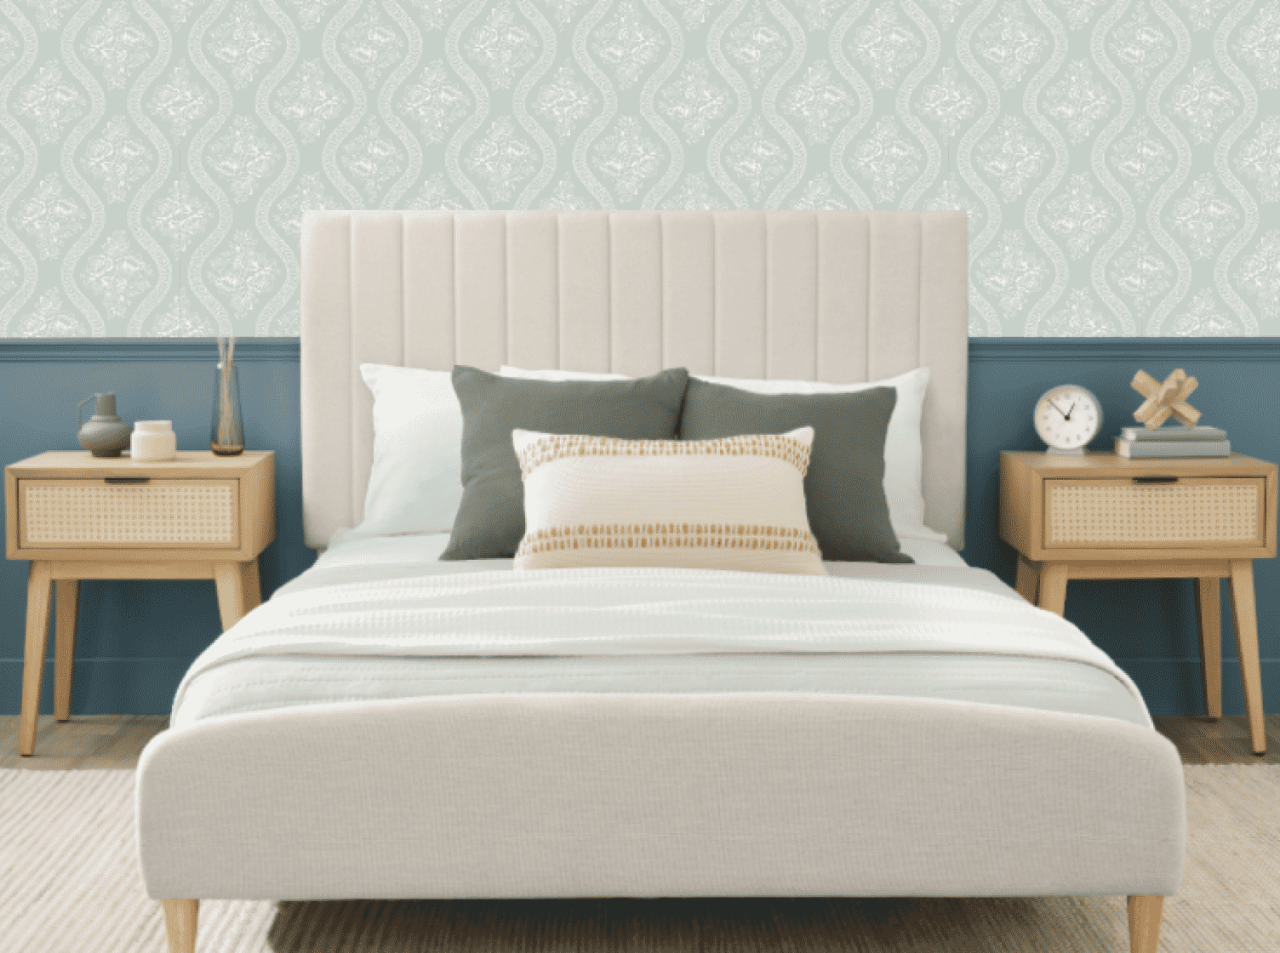 A large bed with neutral colors with twin light wooden nightstands on each side in front of a wall with light green wallpaper.